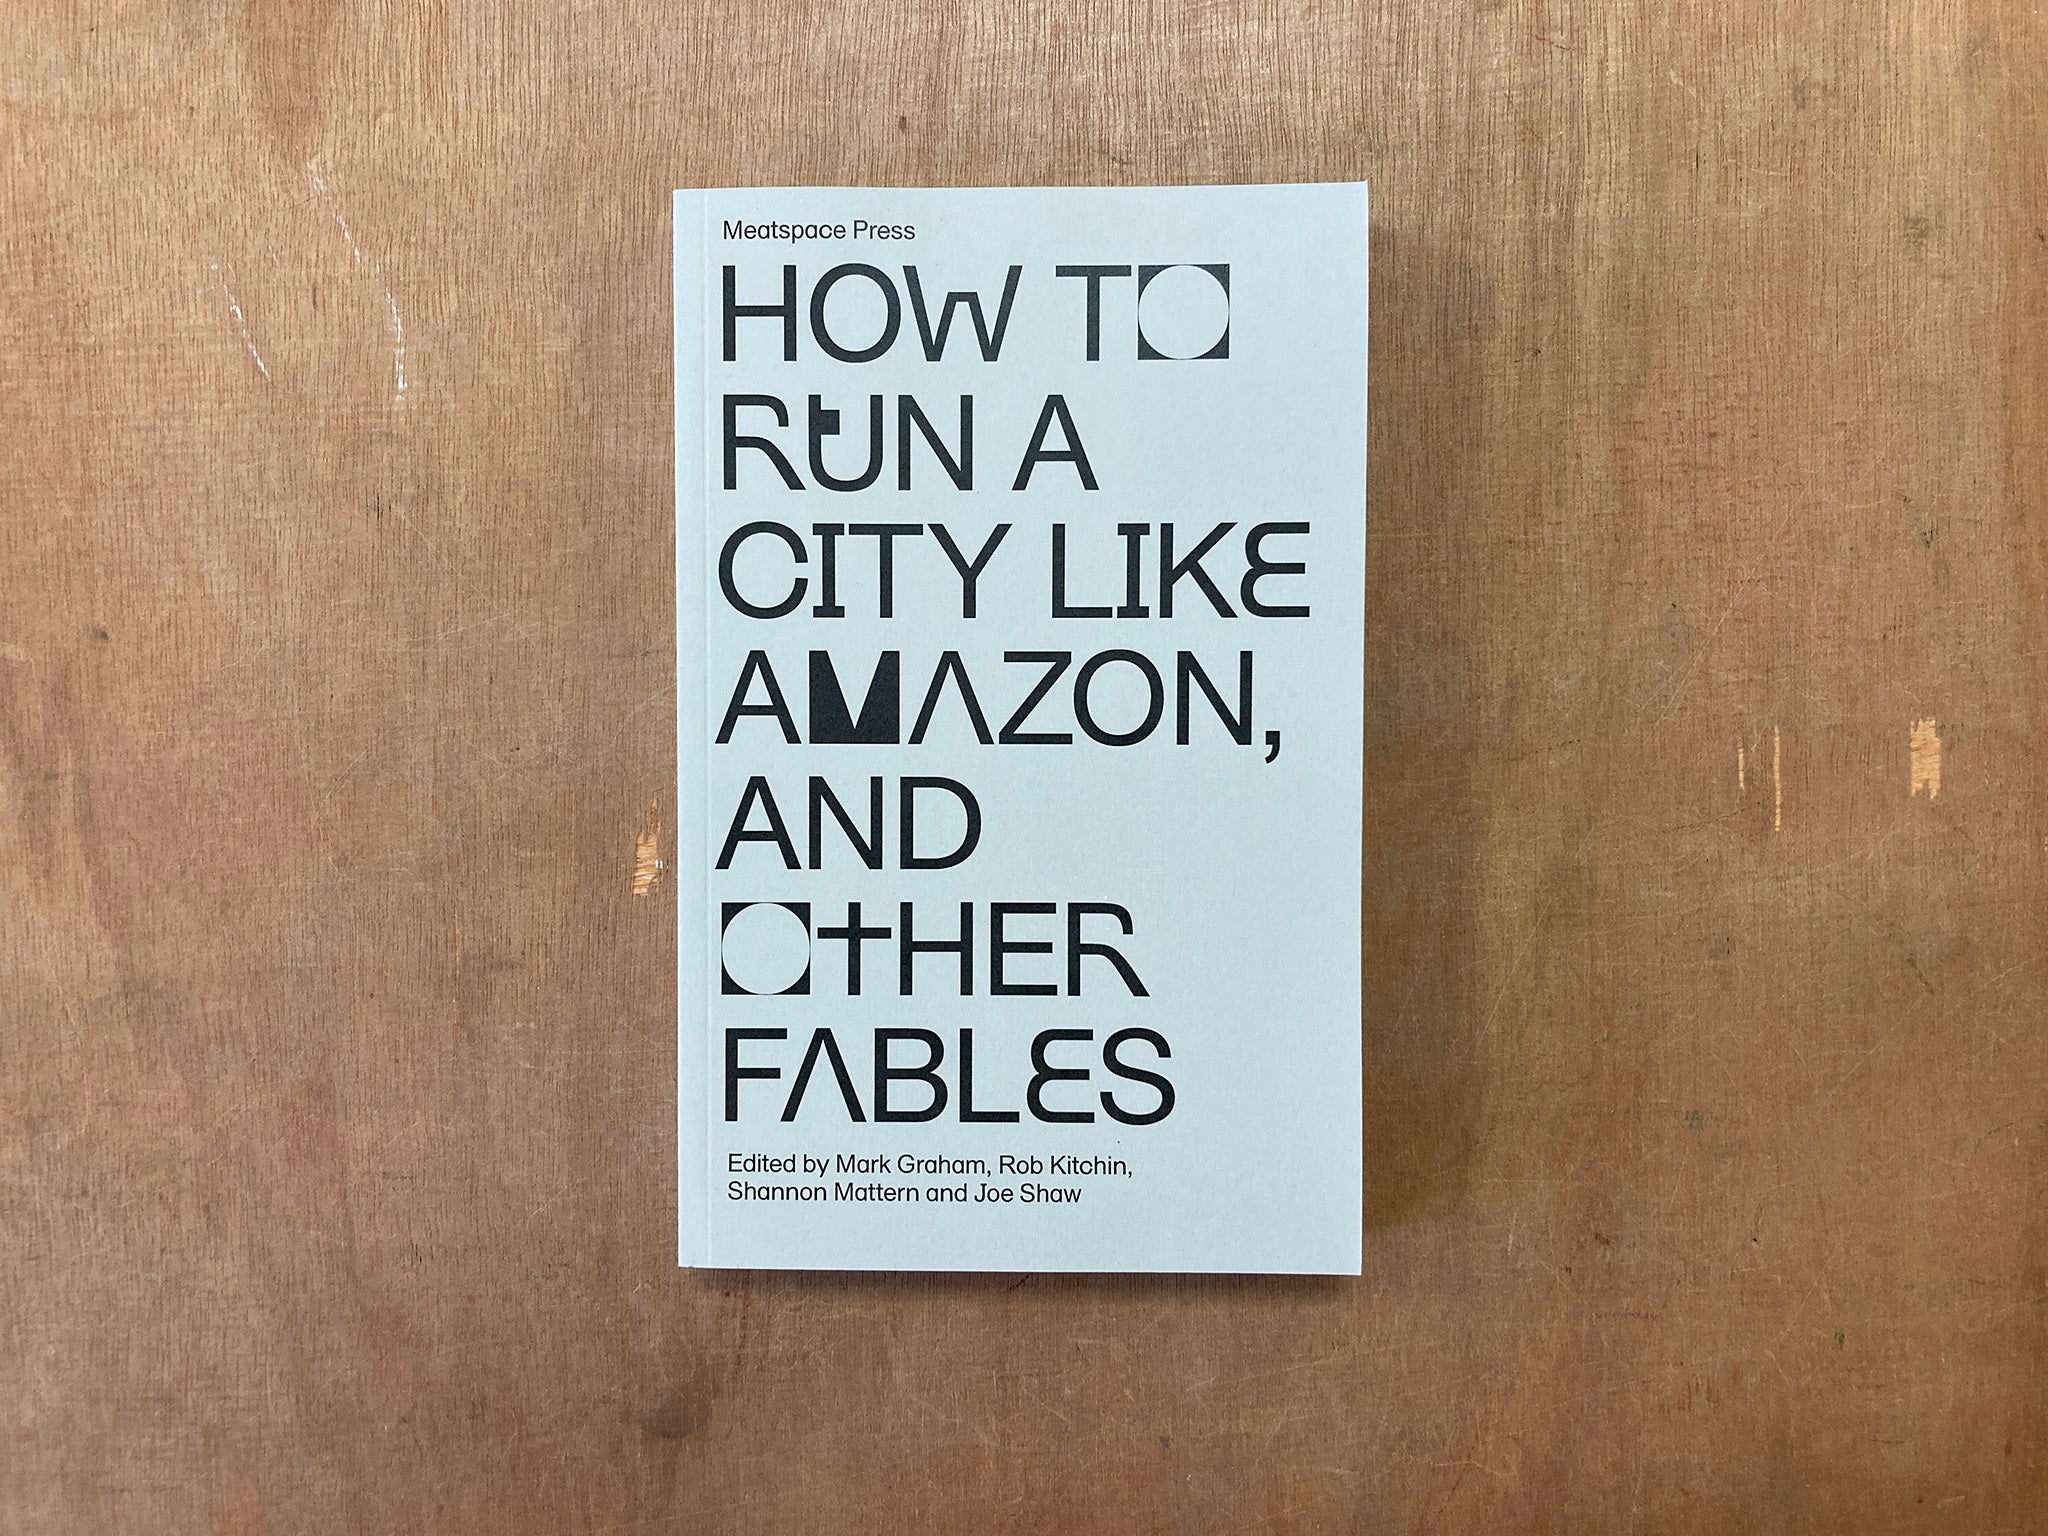 HOW TO RUN A CITY LIKE AMAZON, AND OTHER FABLES edited by Mark Graham, Rob Kitchin, Shannon Mattern and Joe Shaw